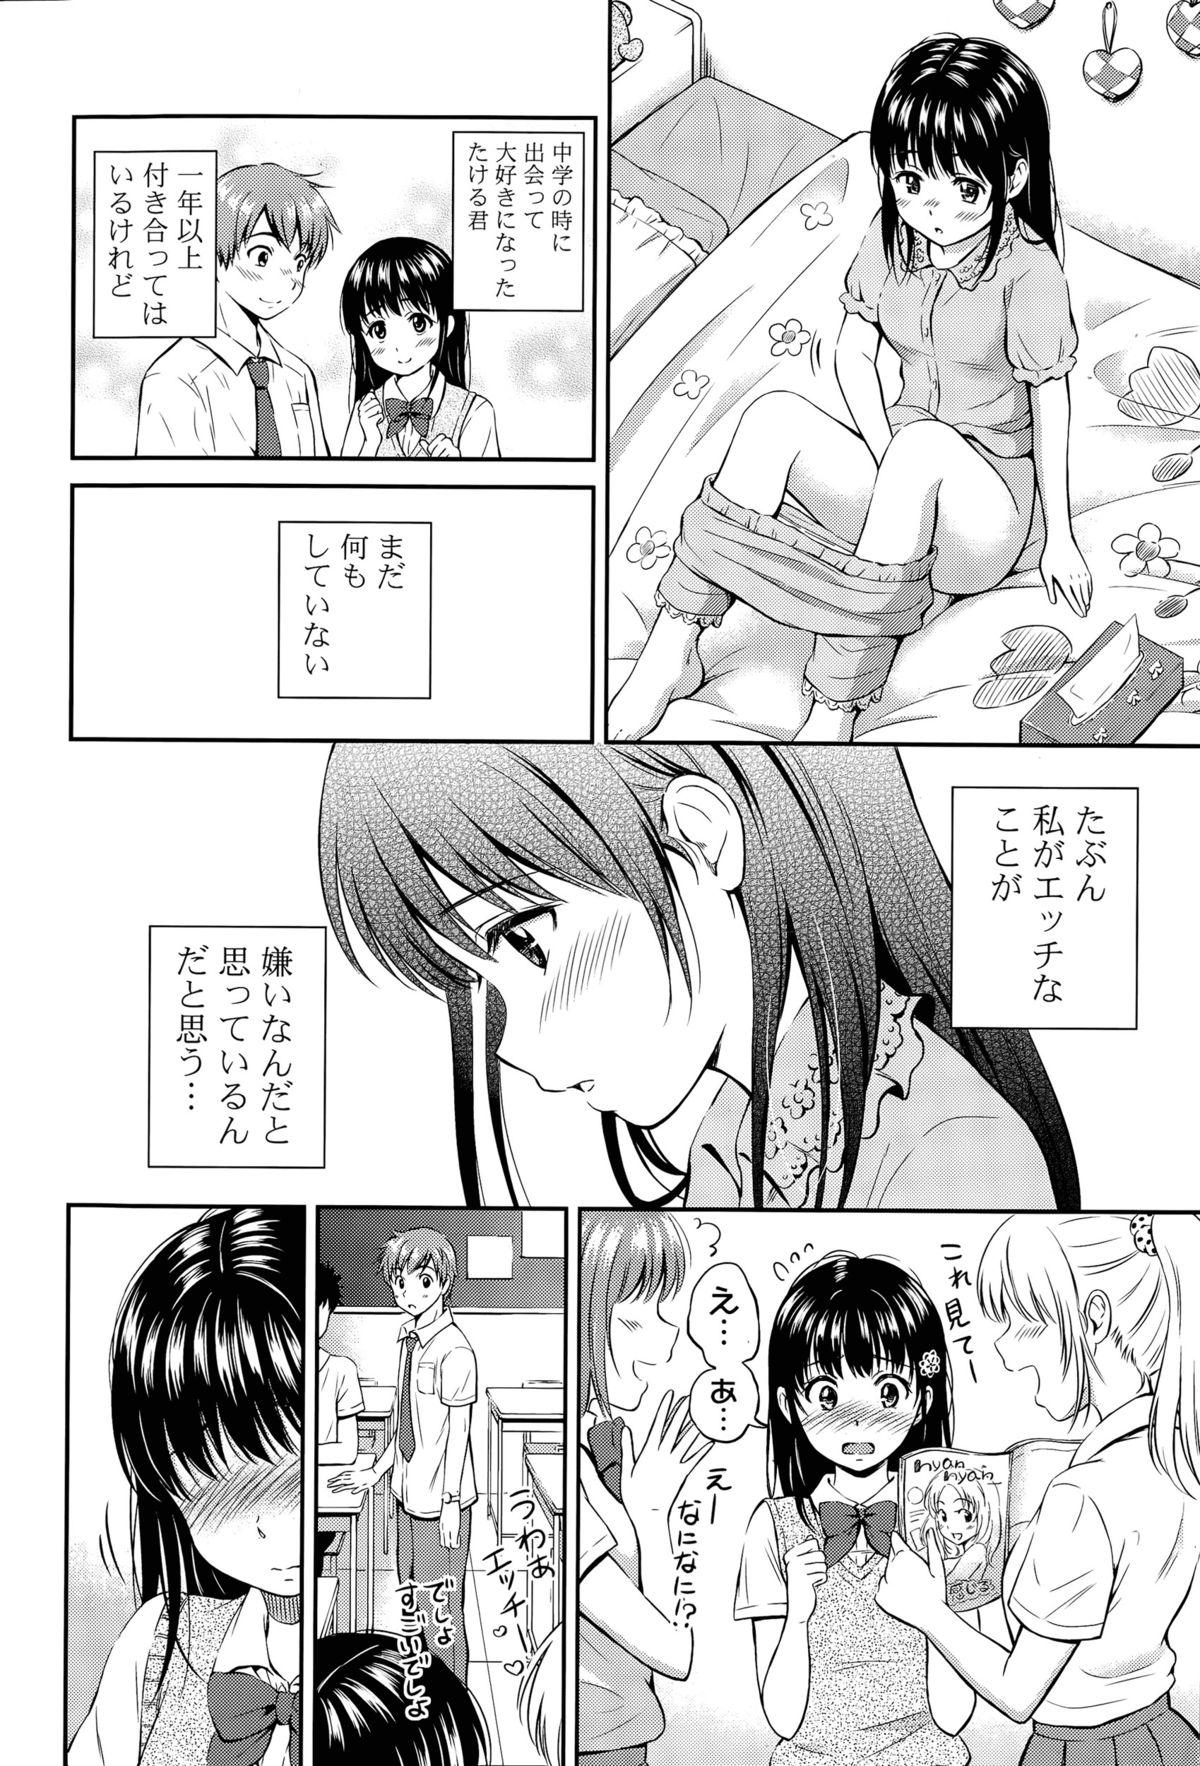 Party Kotomi no Himitsu Ch. 1-2 Swingers - Page 2